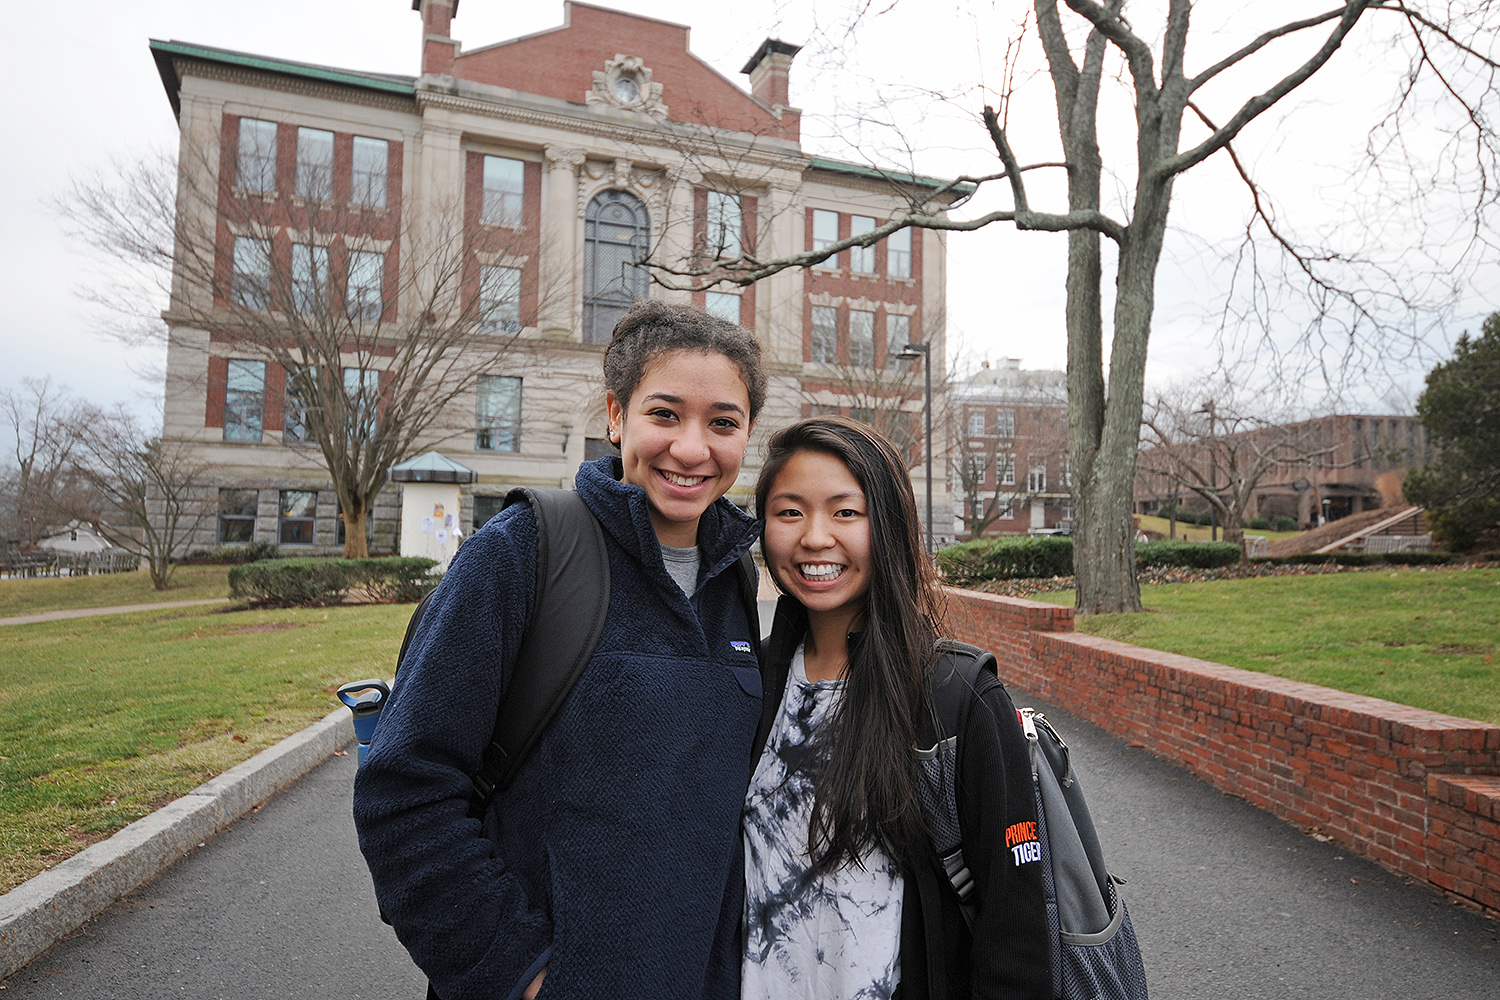 Erica Yim ’19 of Baltimore, M.D. and and Allegra Fils-Aime ’19 of Long Island, N.Y. were most elated to return to Wesleyan to see each other and other friends. “We are roommates in Butts C, and we missed each other. We’re glad to be back at Wes,” Allegra said. 